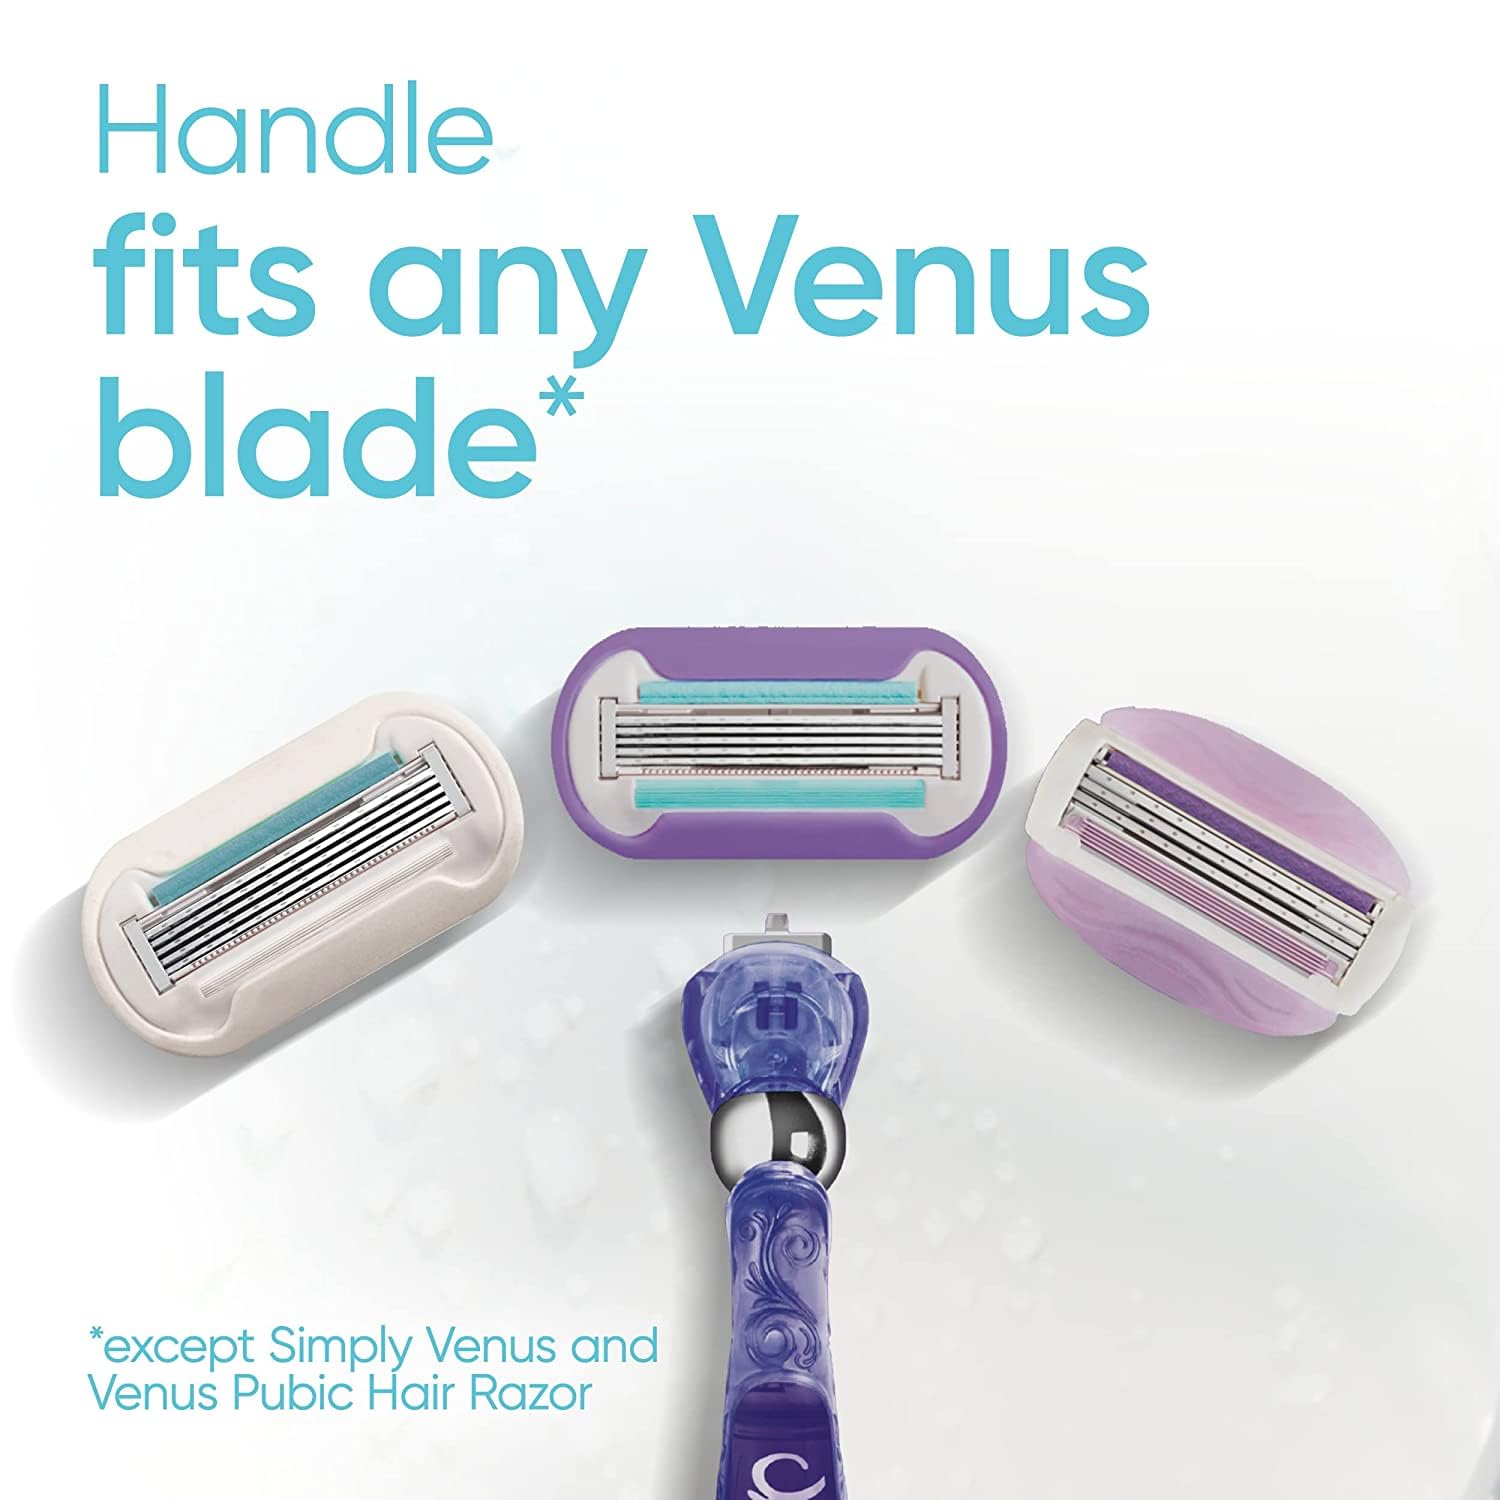 Wholesale prices with free shipping all over United States Gillette Venus Deluxe Smooth Swirl Womens Razor Blade Refills, 6 Count, Moisture Ribbon to Protect Against Irritation (Pack of 1) - Steven Deals